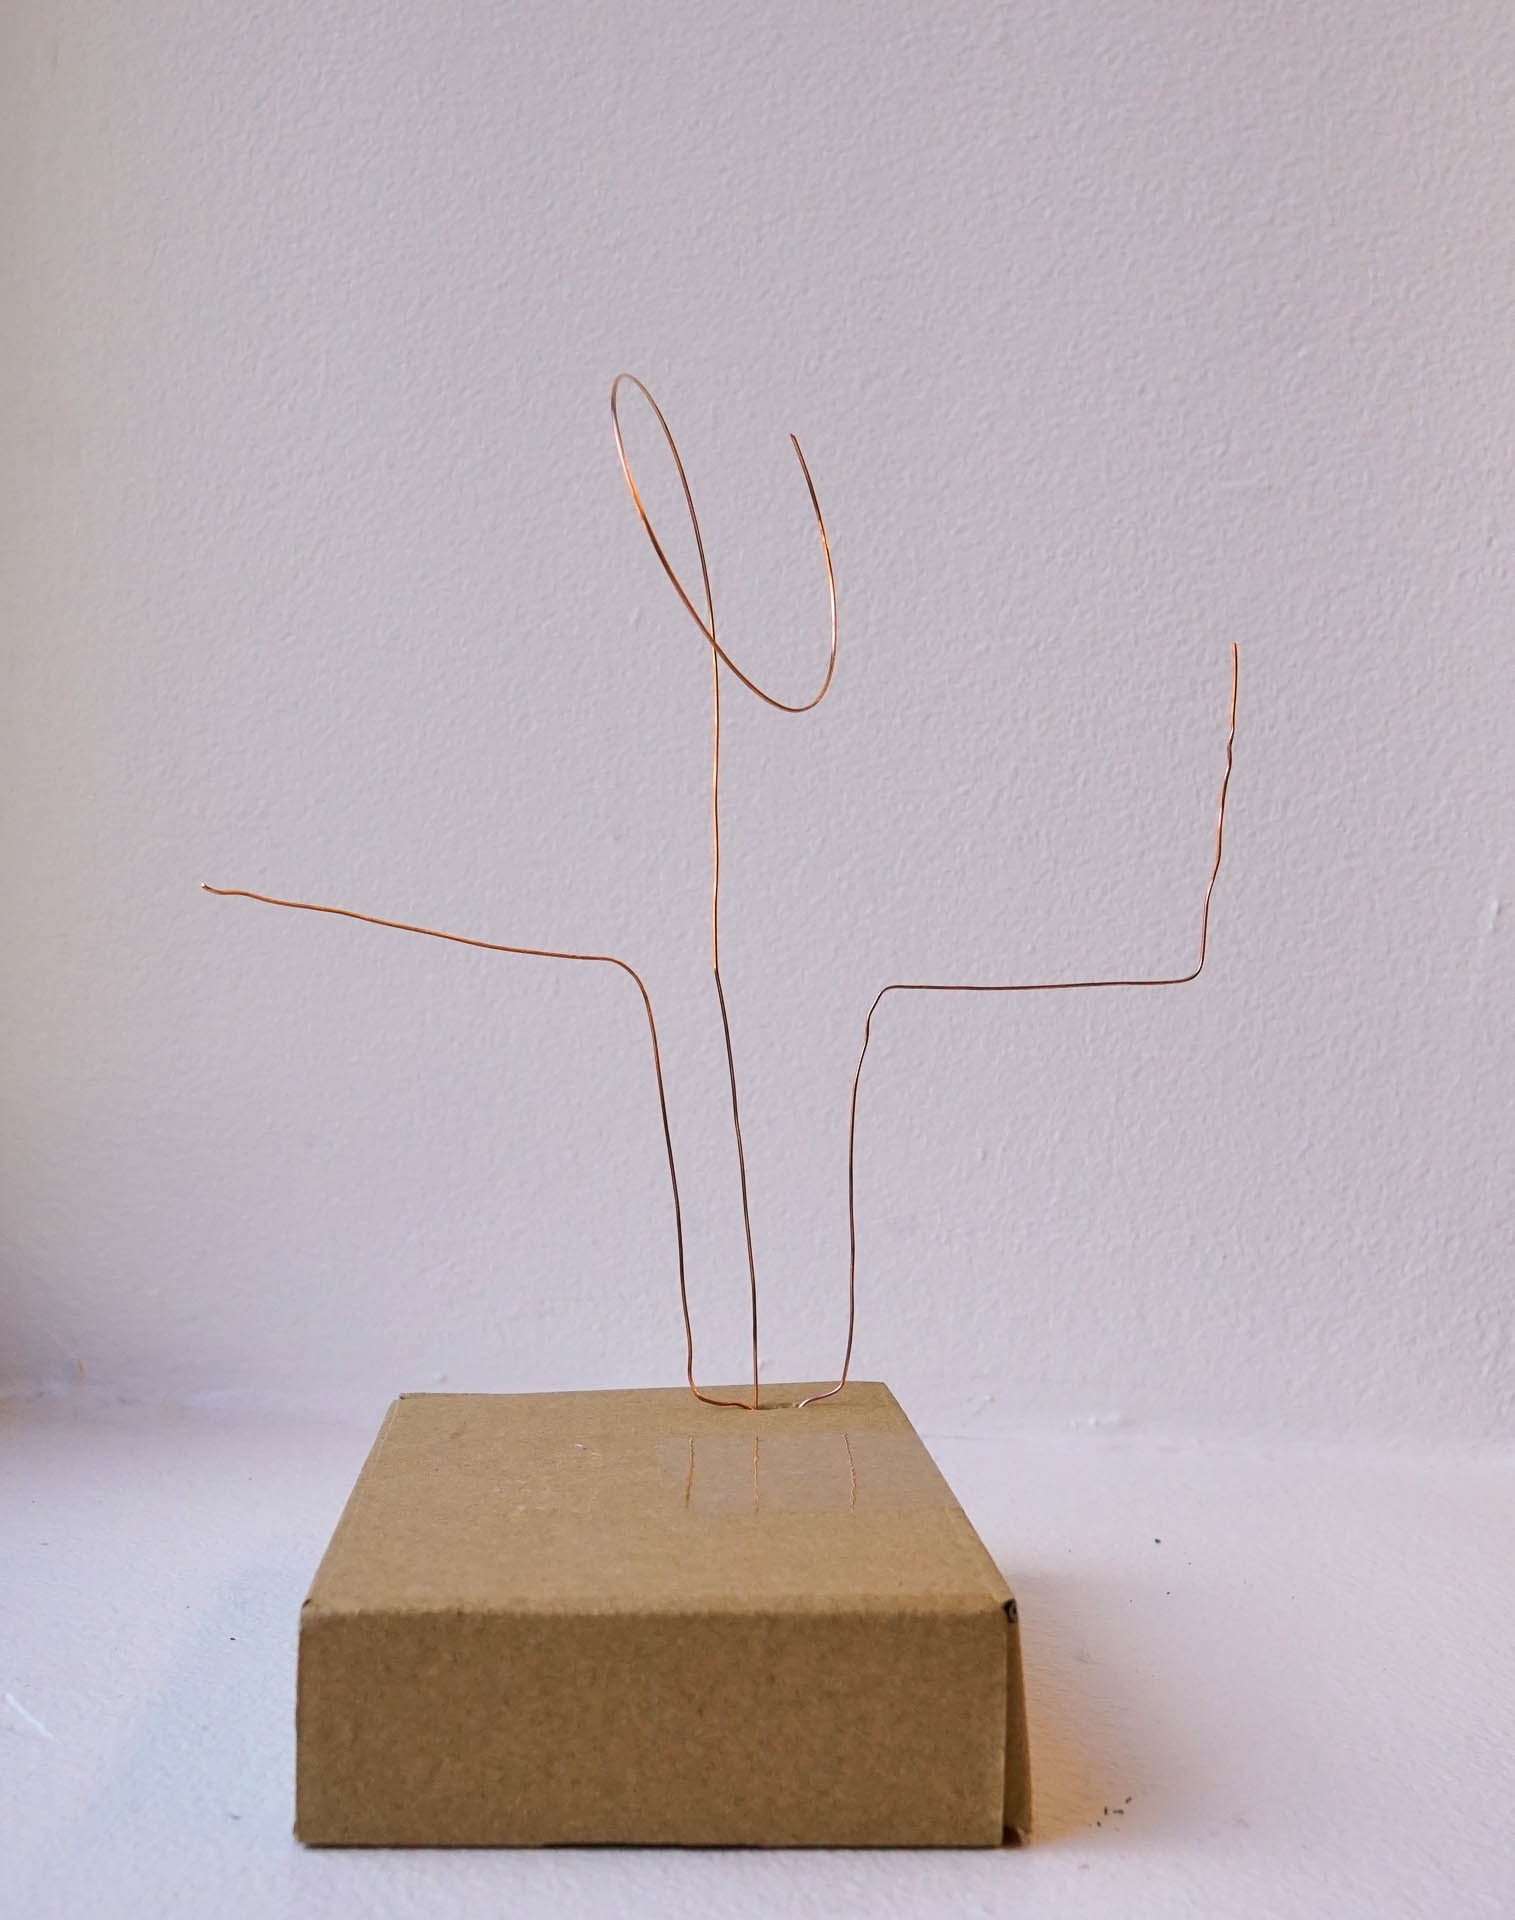 image of second prototype, which is a small brown cardboard box, with 3 copper antennas sticking out from one end